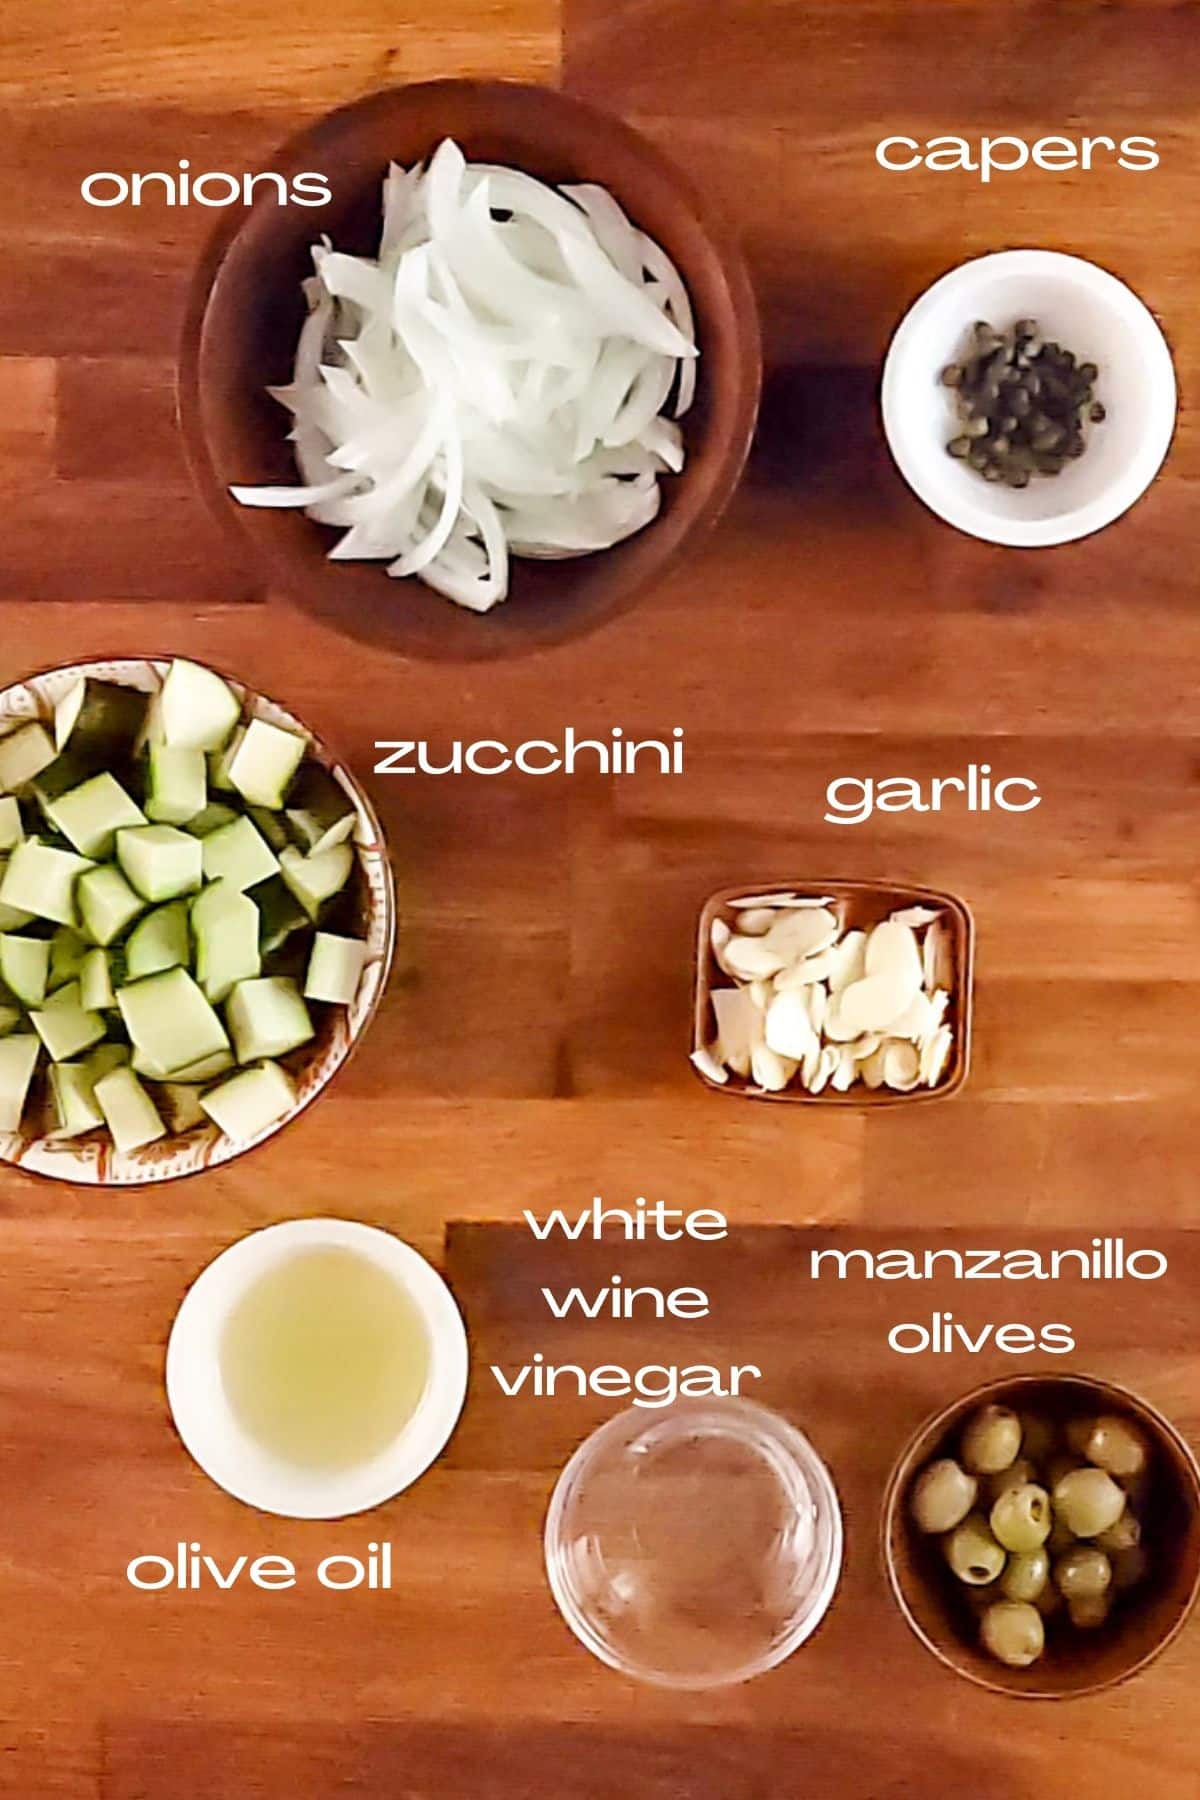 ingredients for zucchini en escabeche; zucchini, onions, garlic, Spanish olives, capers, olive oil, and white wine vinegar.